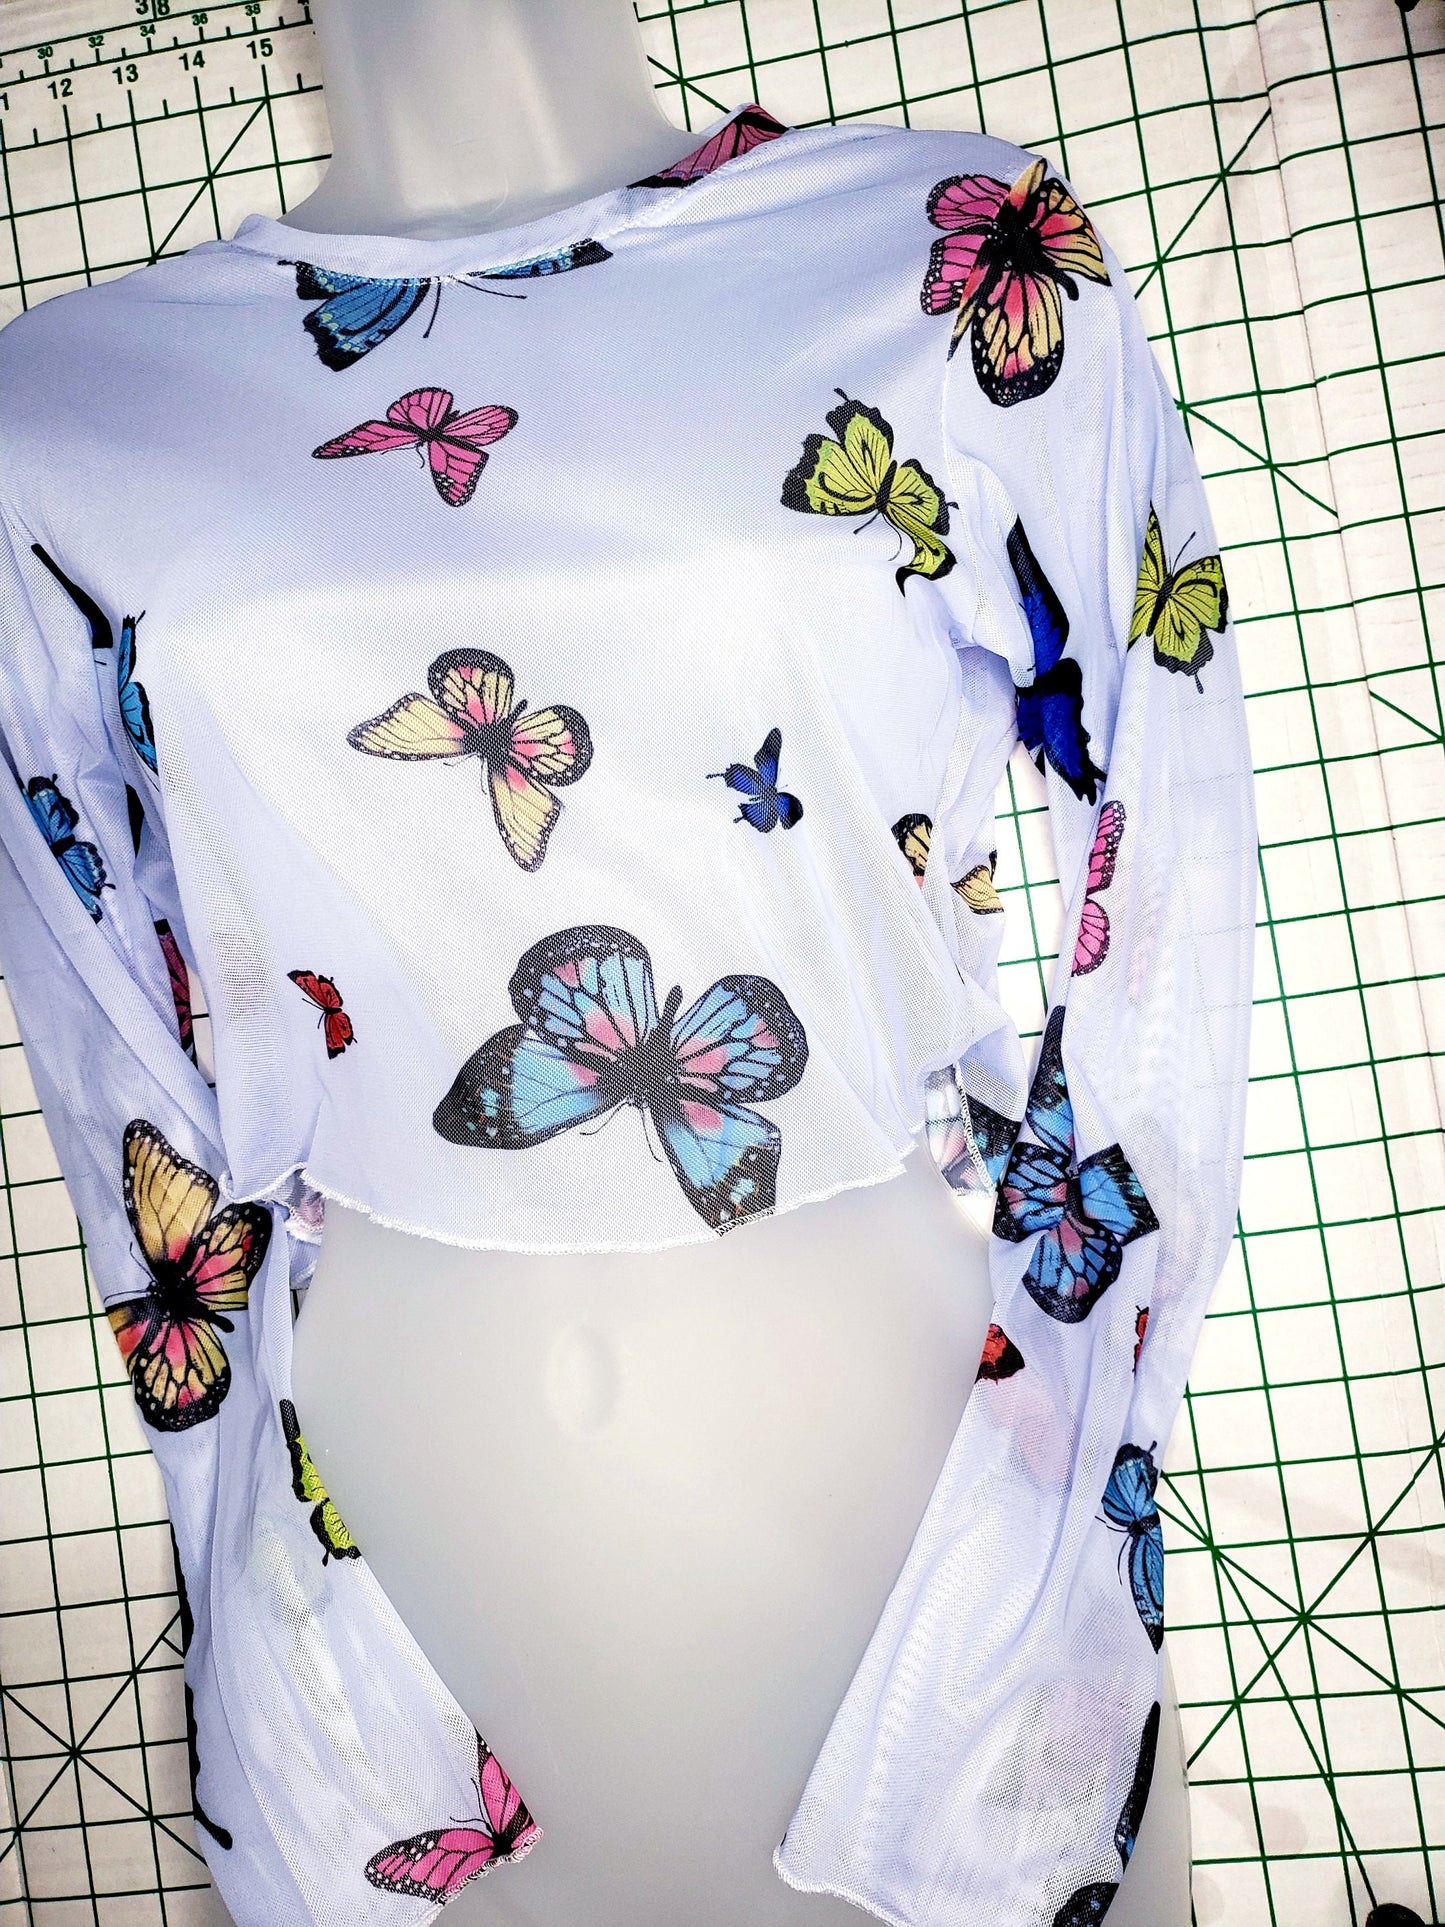 Butterfly Sheer Mesh Going out tops for women long sleeve shirt funky 90s trendy colorful see through blue pink kawaii